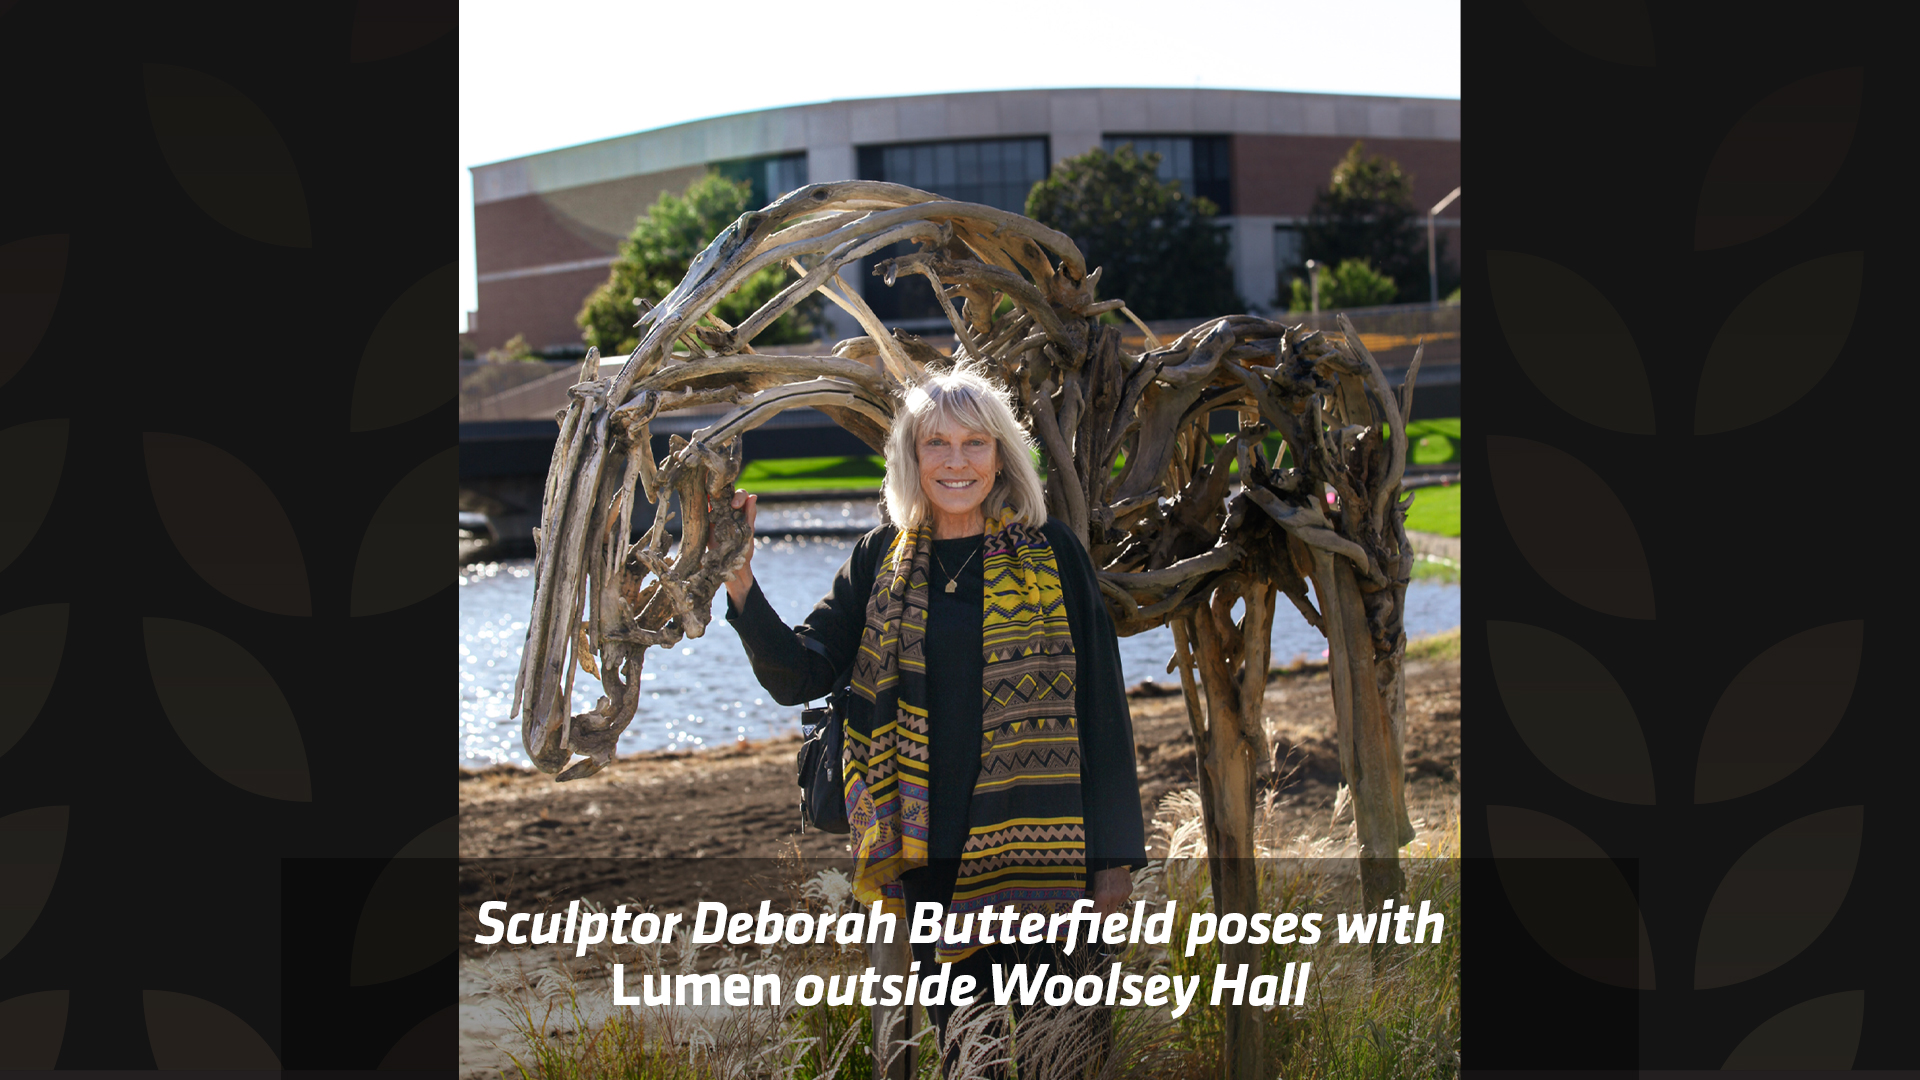 Sculptor Deborah Butterfield poses with Lumen outside Woolsey Hall.